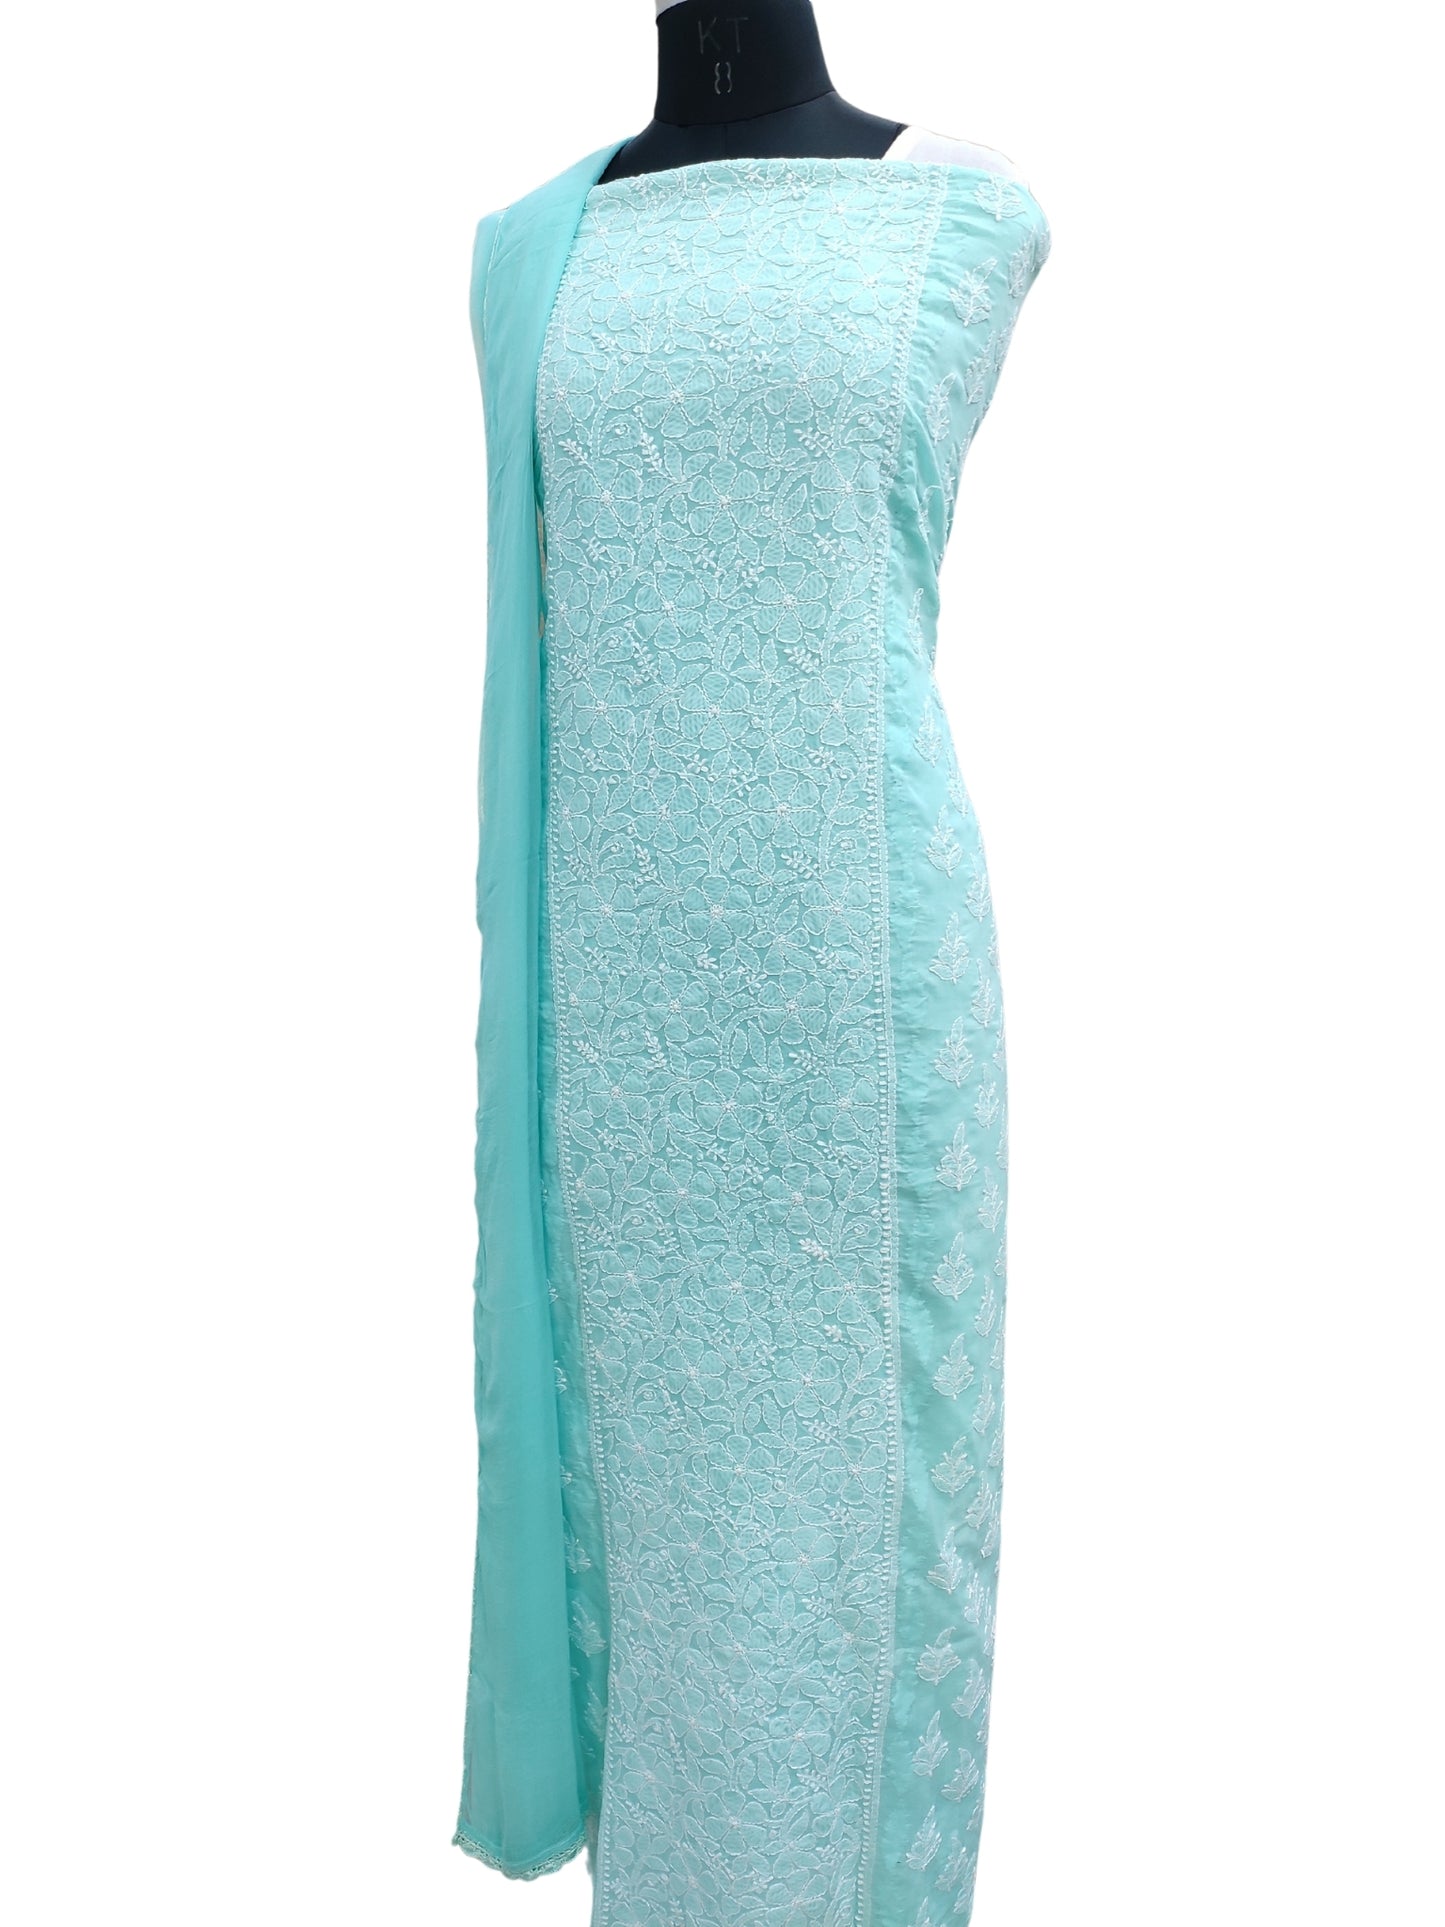 Shyamal Chikan Hand Embroidered Sea Green Cotton Lucknowi Chikankari Unstitched Suit Piece With Daraz Work- S22227